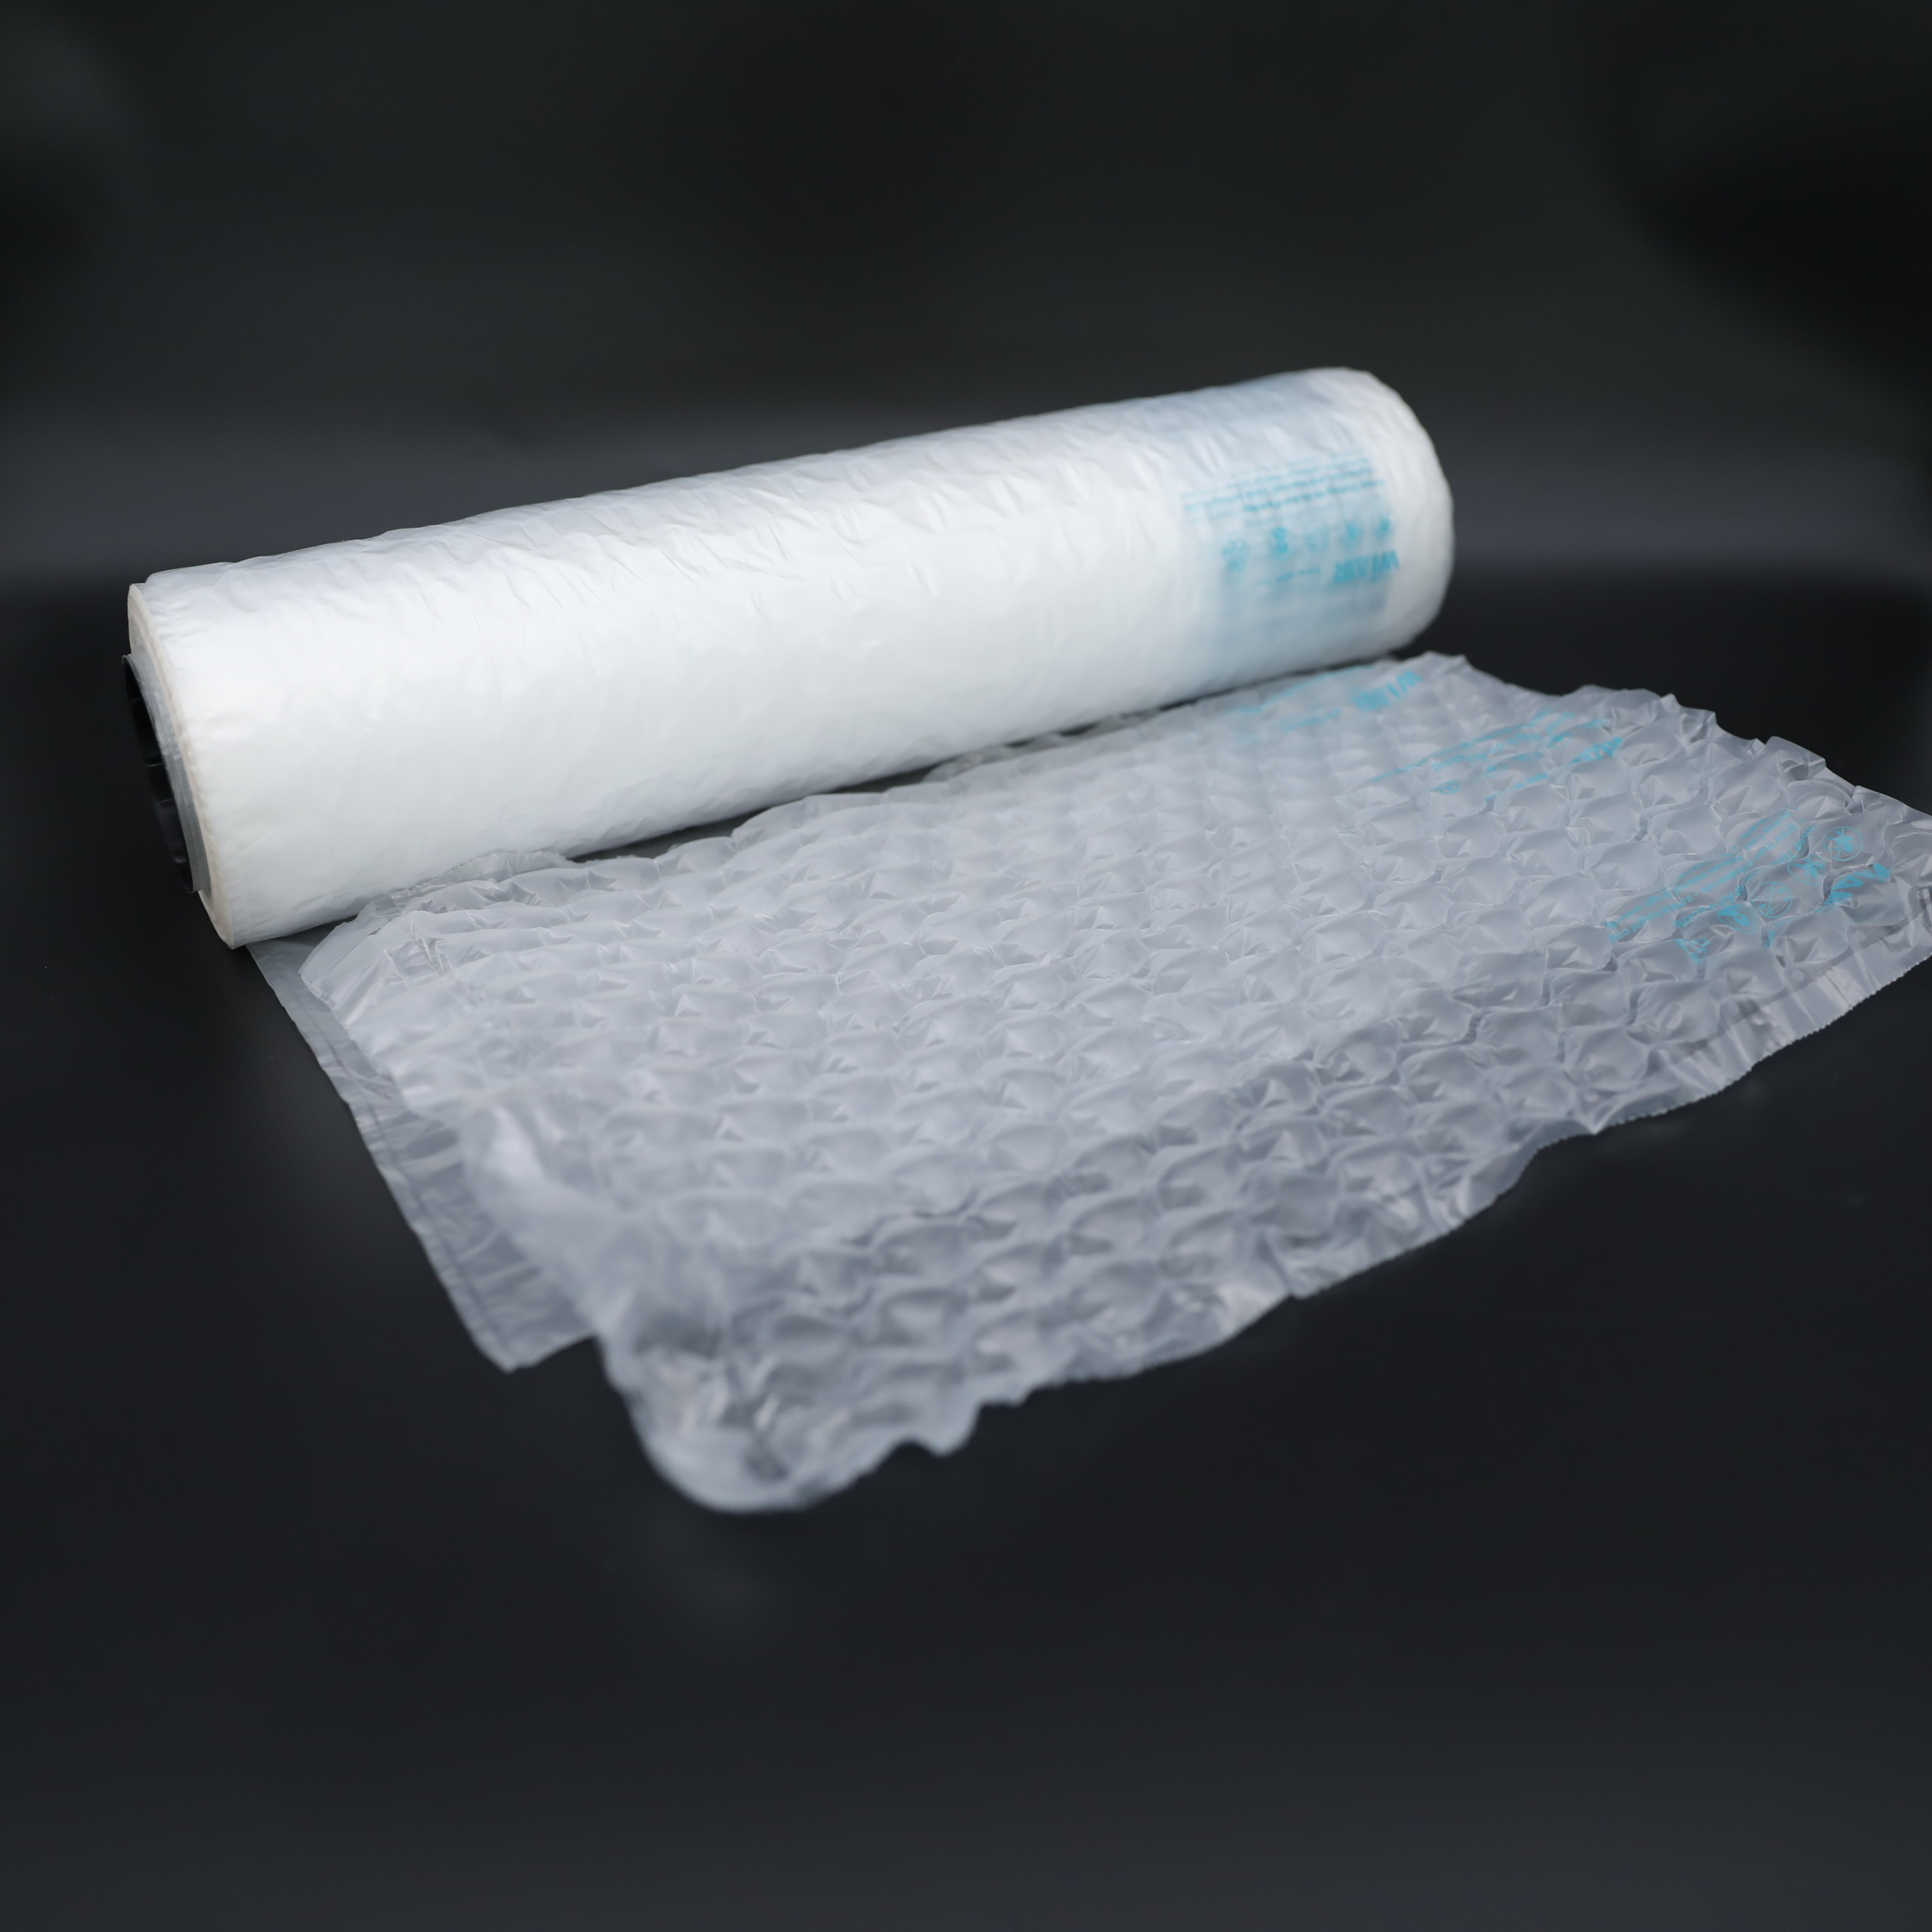 Transparent PE Air Cushion Film for Express Packing